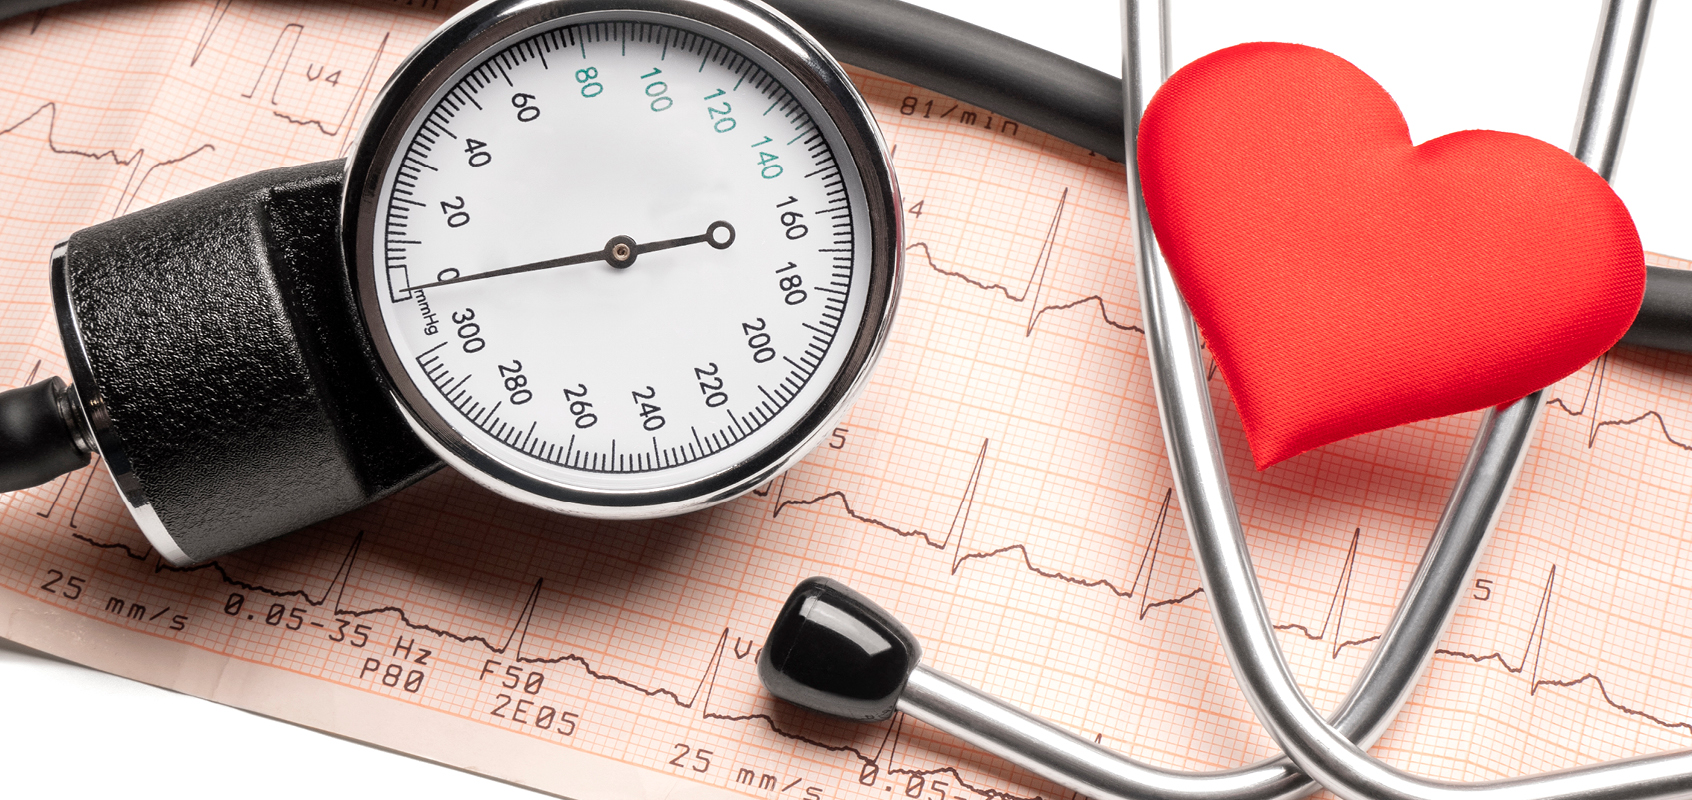 Close-up of blood pressure dial with stethoscope and red heart figurine on top of blood pressure readout paper